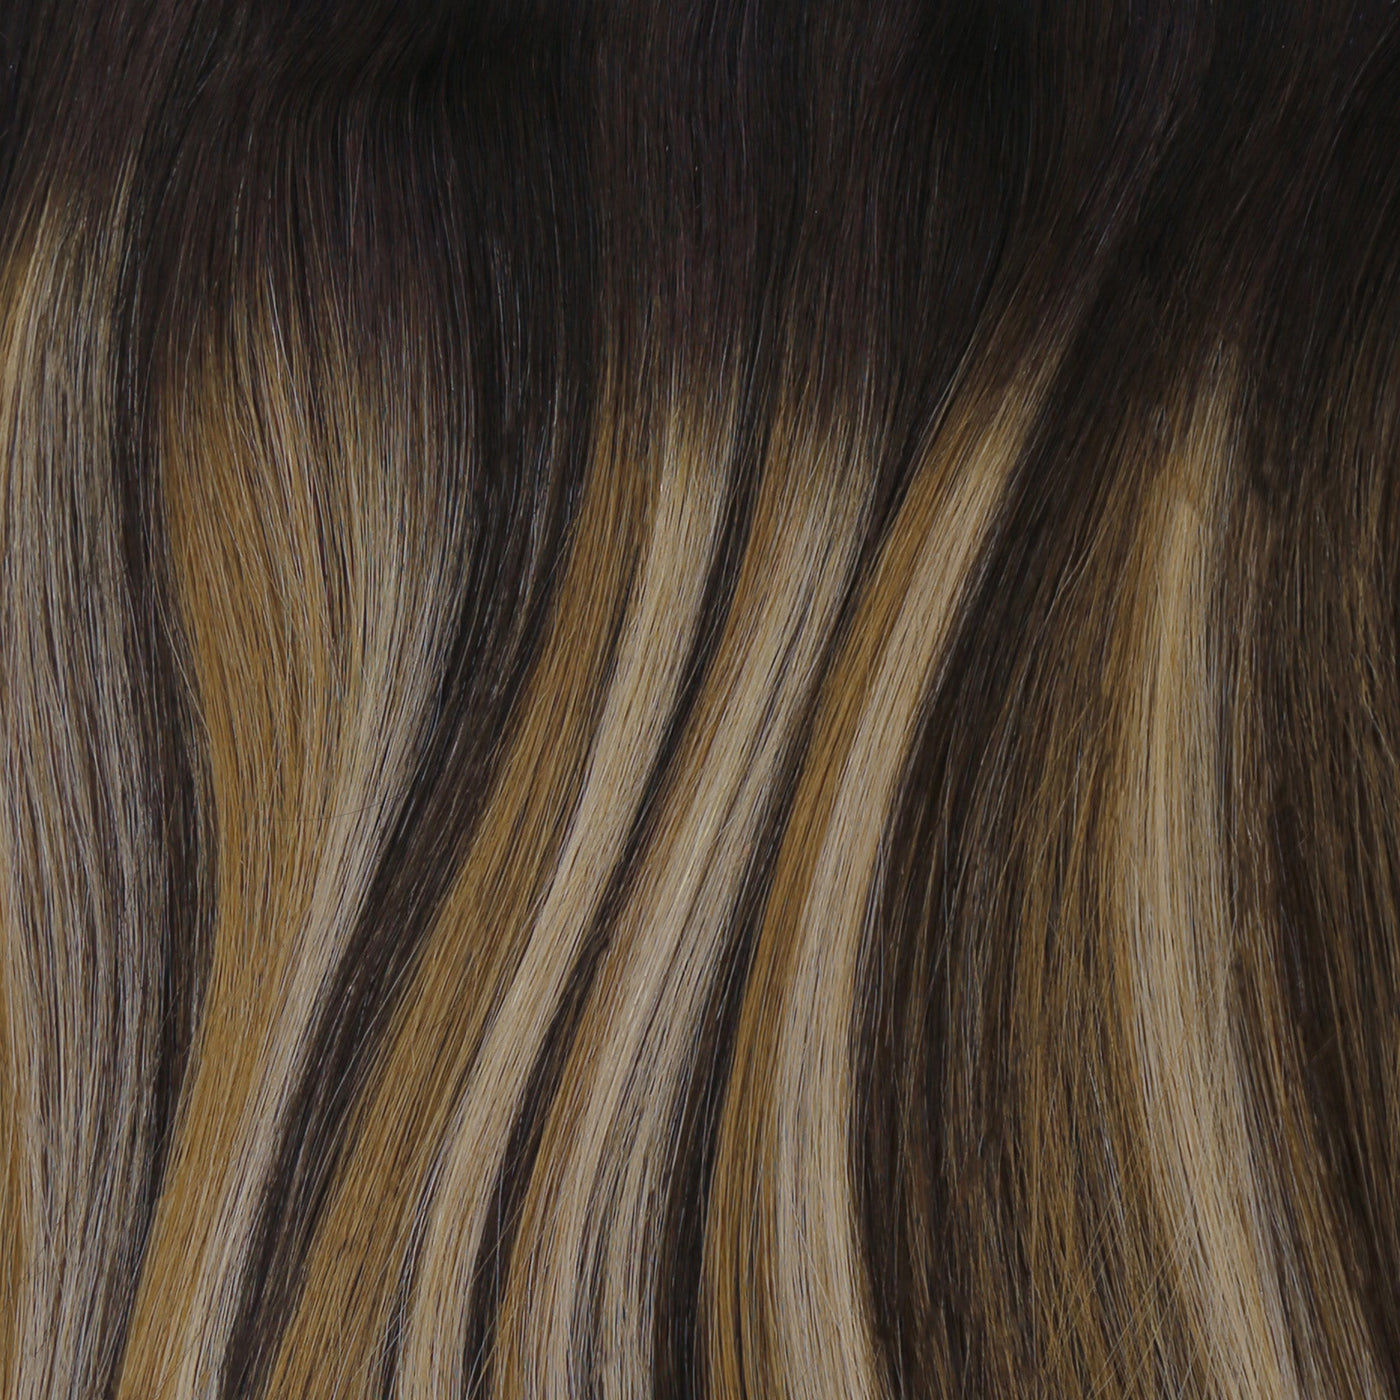 Pacific Balayage AquaLyna Ponytail Hair Extension